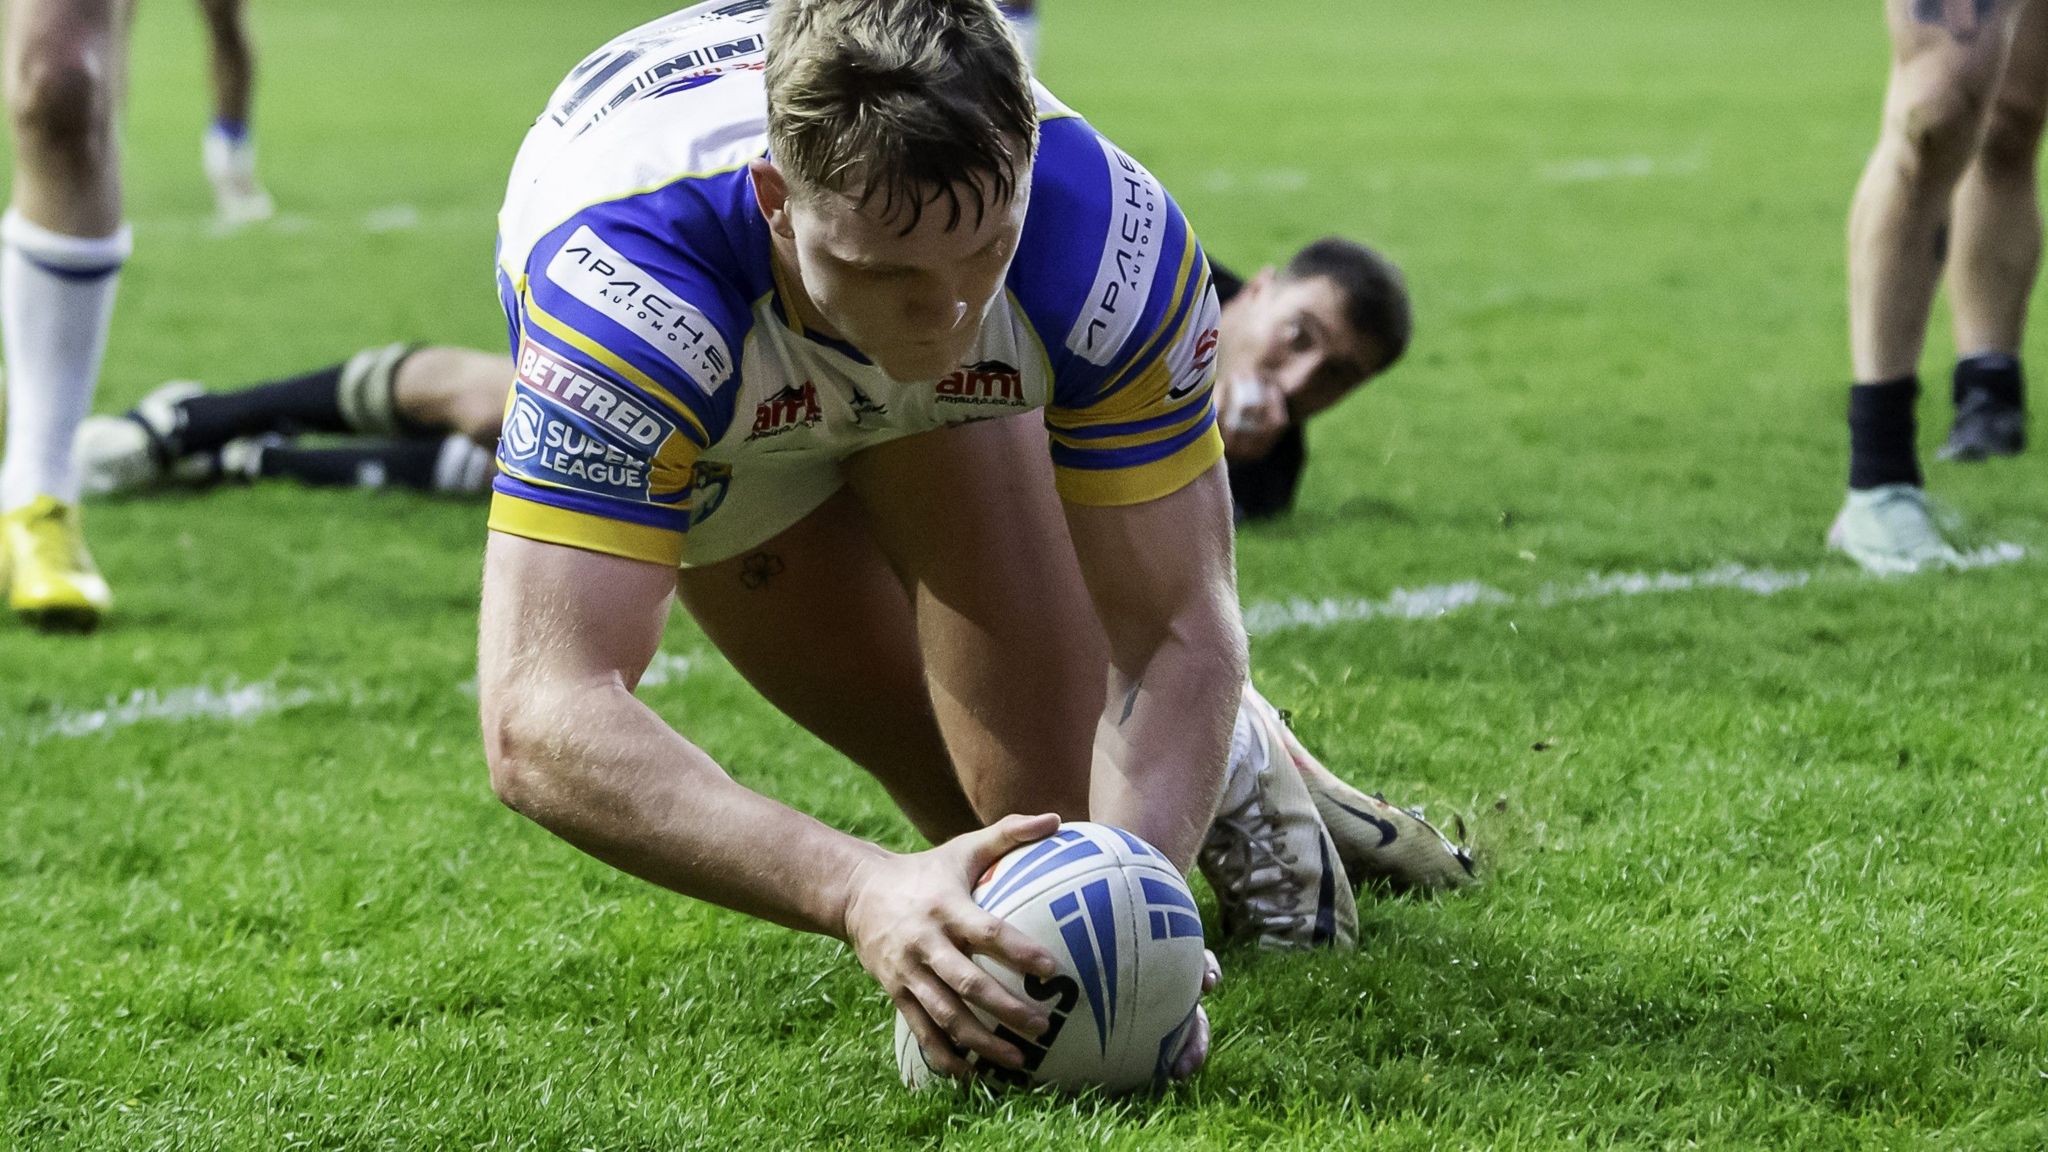 James McDonnell scores a try for Leeds against London Broncos